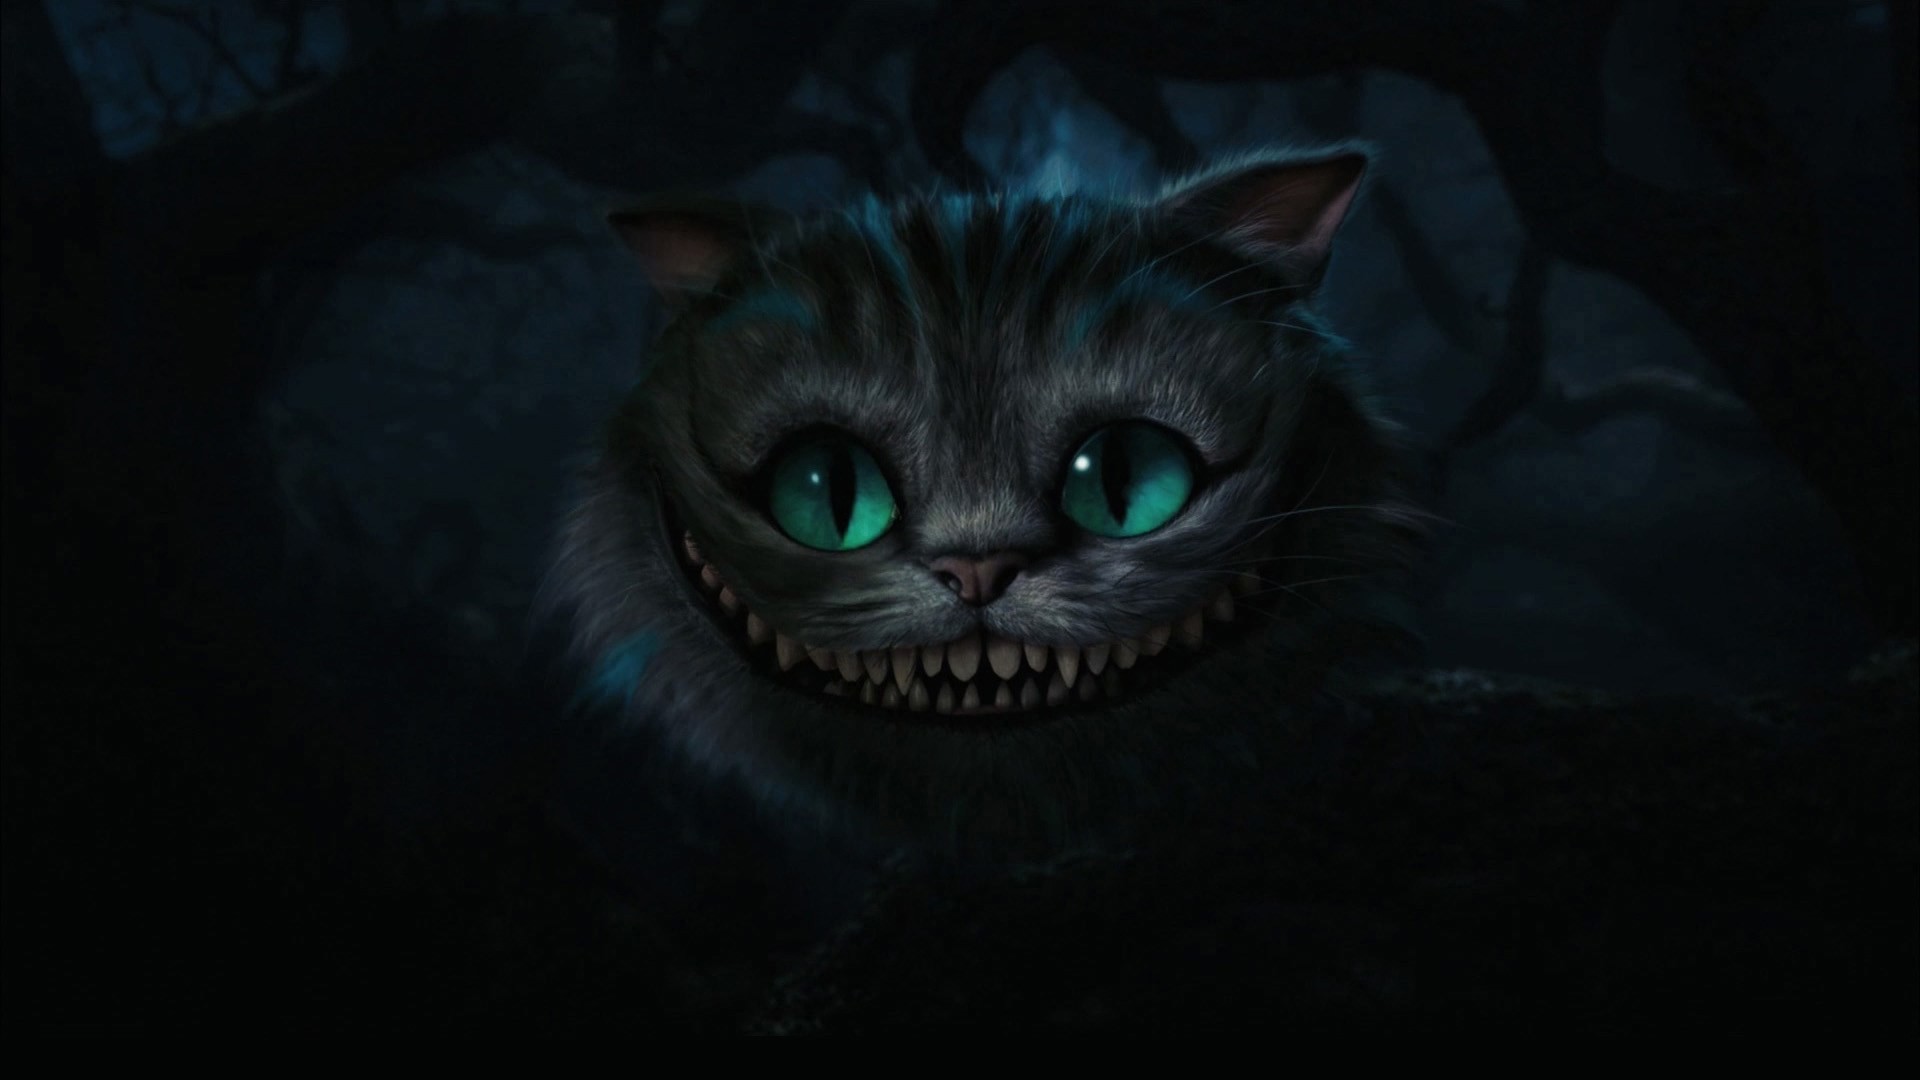 1920x1080 ... Amazing Cheshire Cat Live Wallpaper HD Wallpapers of Nature- Full HD  1080p Desktop Backgrounds for Cool ...